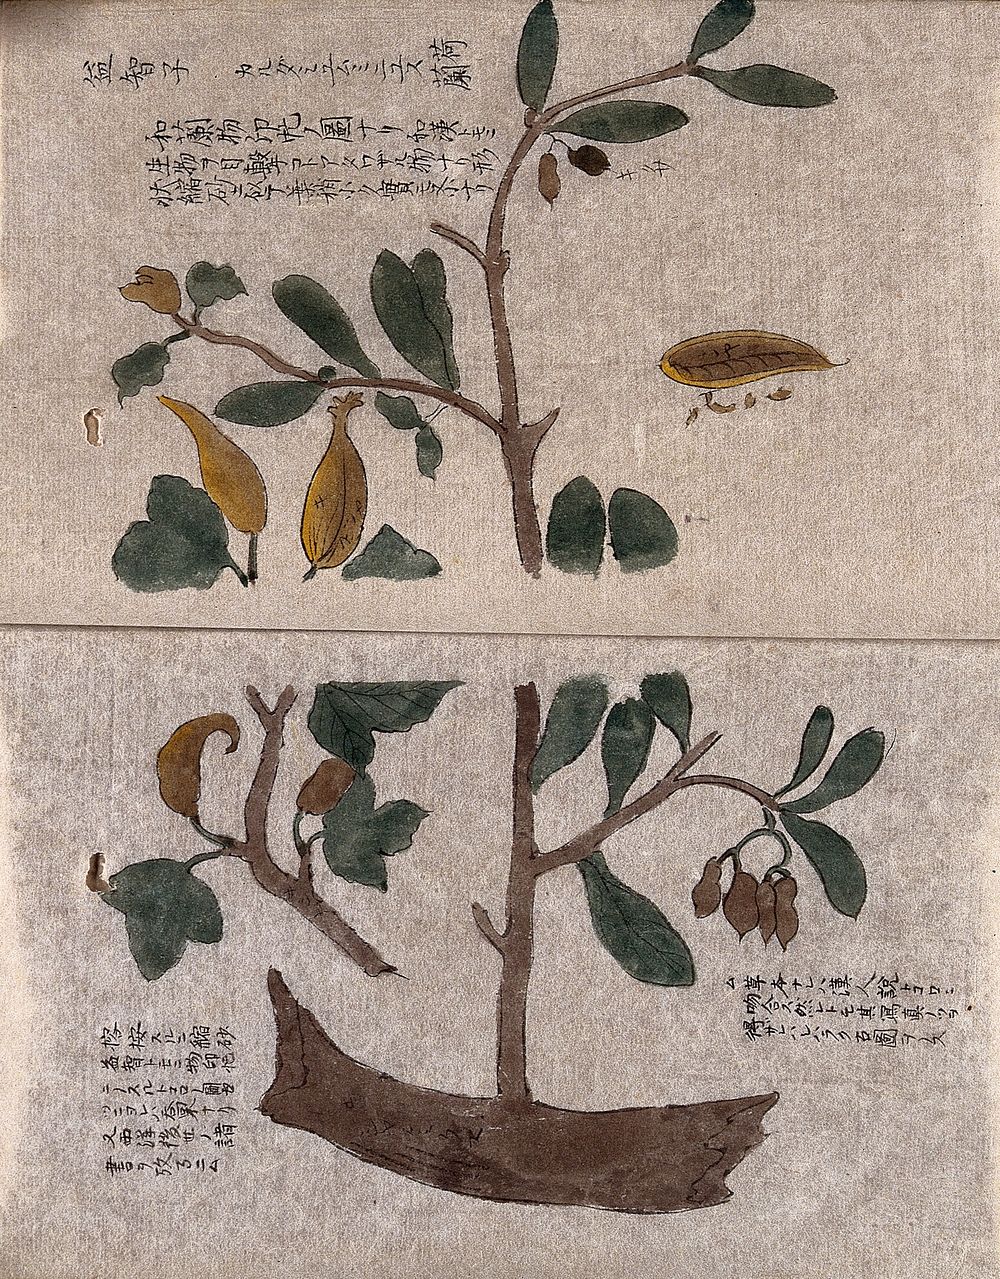 A fruiting tree branch with a small section enlarged and a fruit with some seeds extracted. Watercolour.